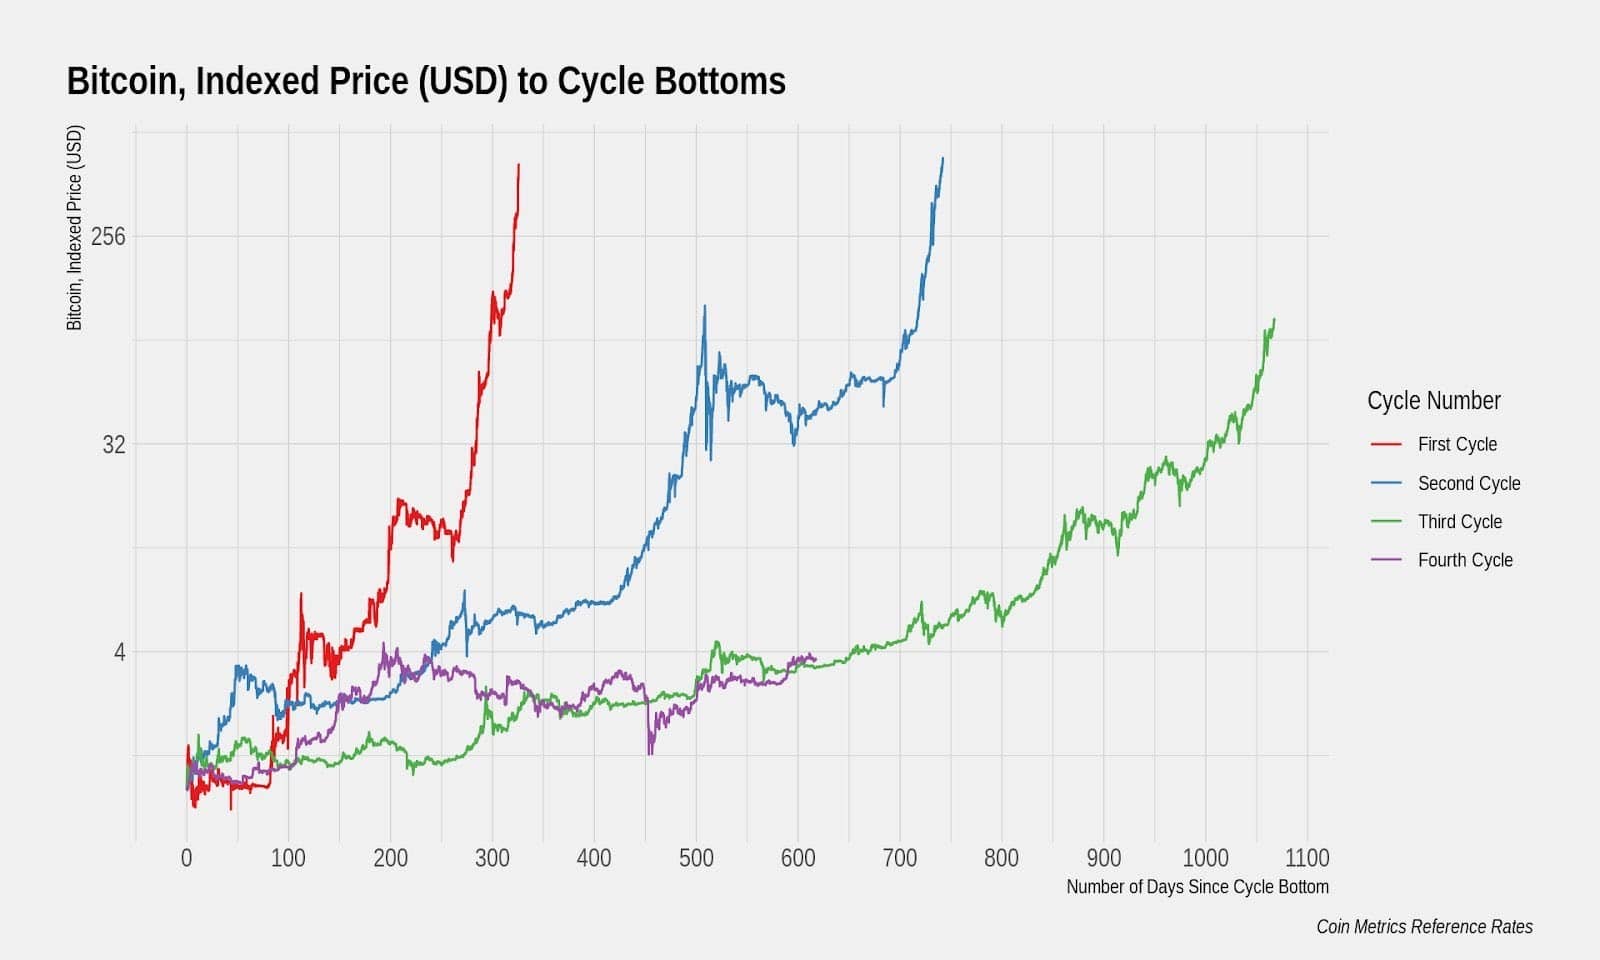 Bitcoin's Lengthening Price Cycles